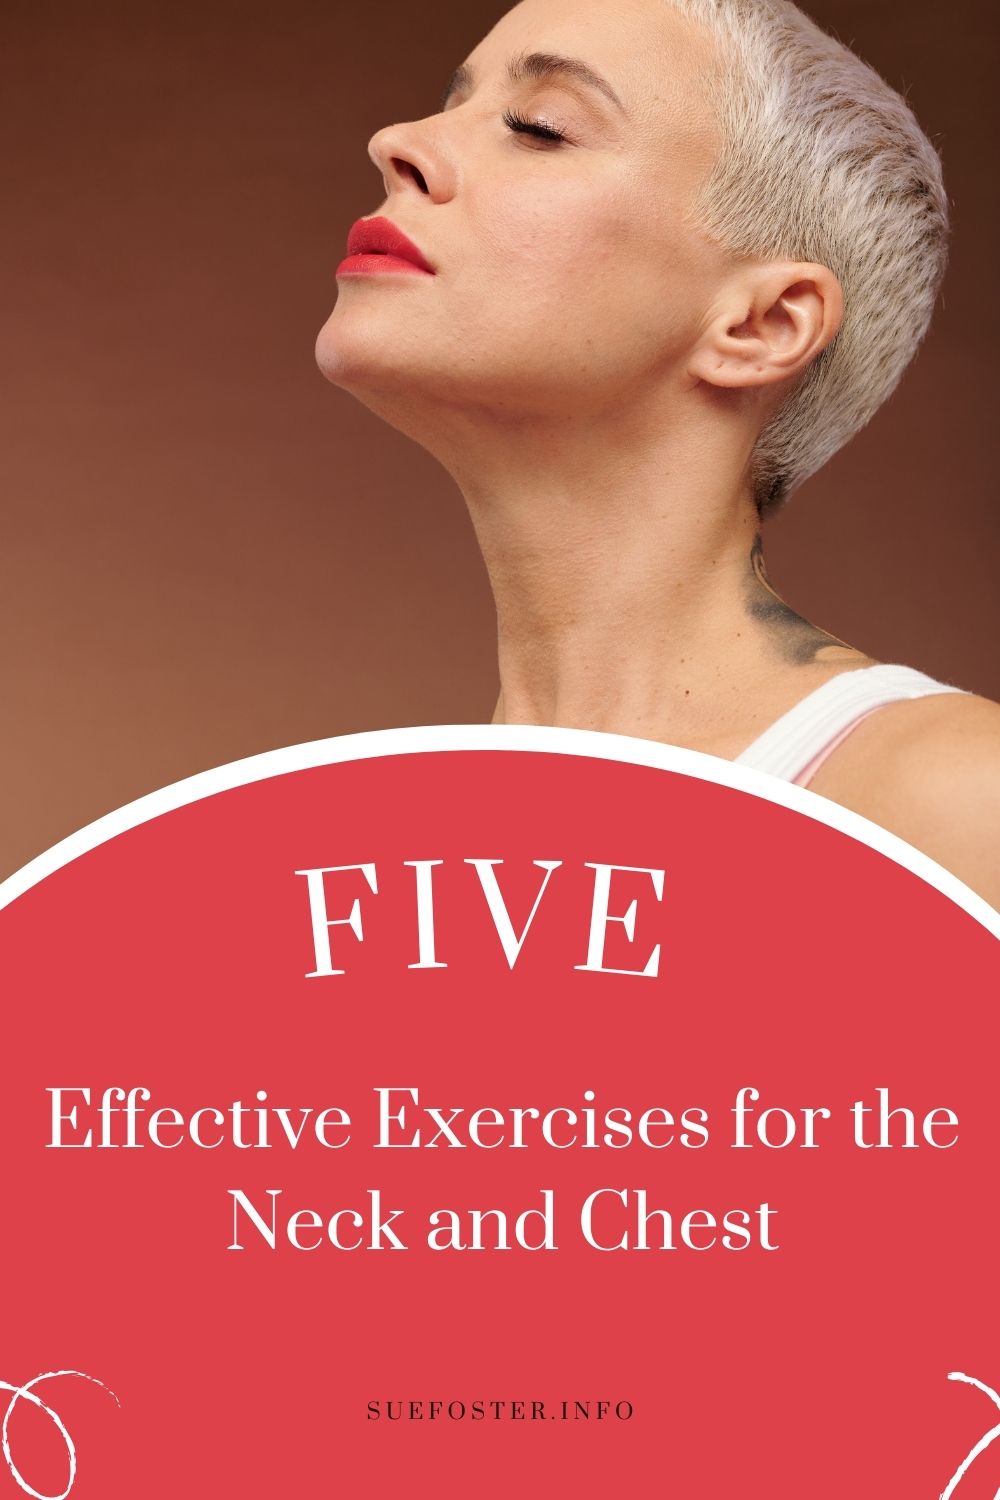 Try 5 effective exercises to combat crepey, loose skin on your neck and chest. Improve skin elasticity, tone, and regain your youthful appearance with these simple, at-home exercises. 